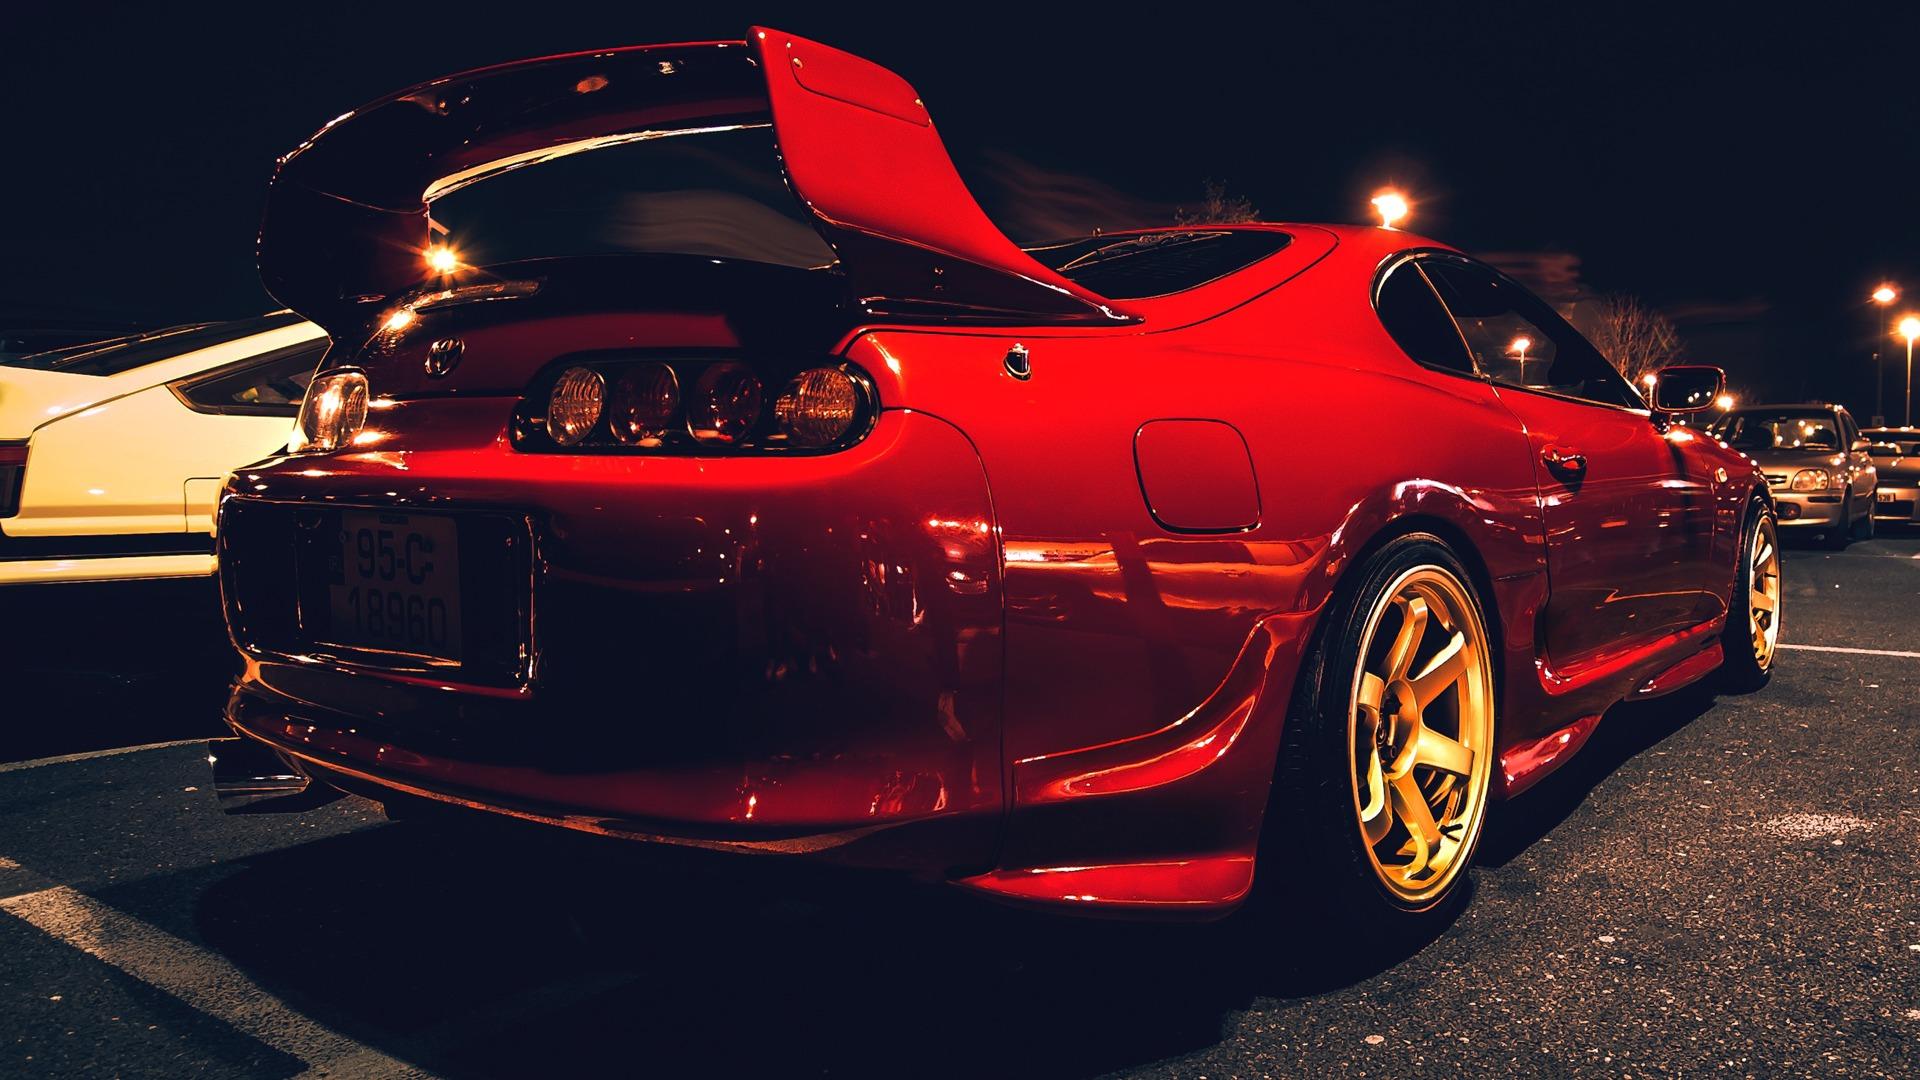 1920 x 1080 · jpeg - Toyota Supra Wallpapers, Pictures, Images